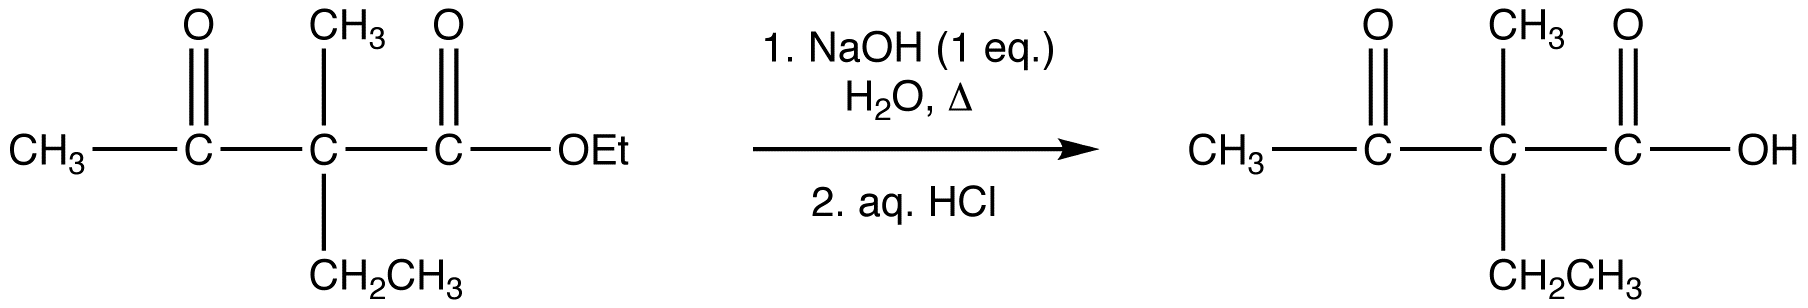 acetoaceticestersynthesis16.png